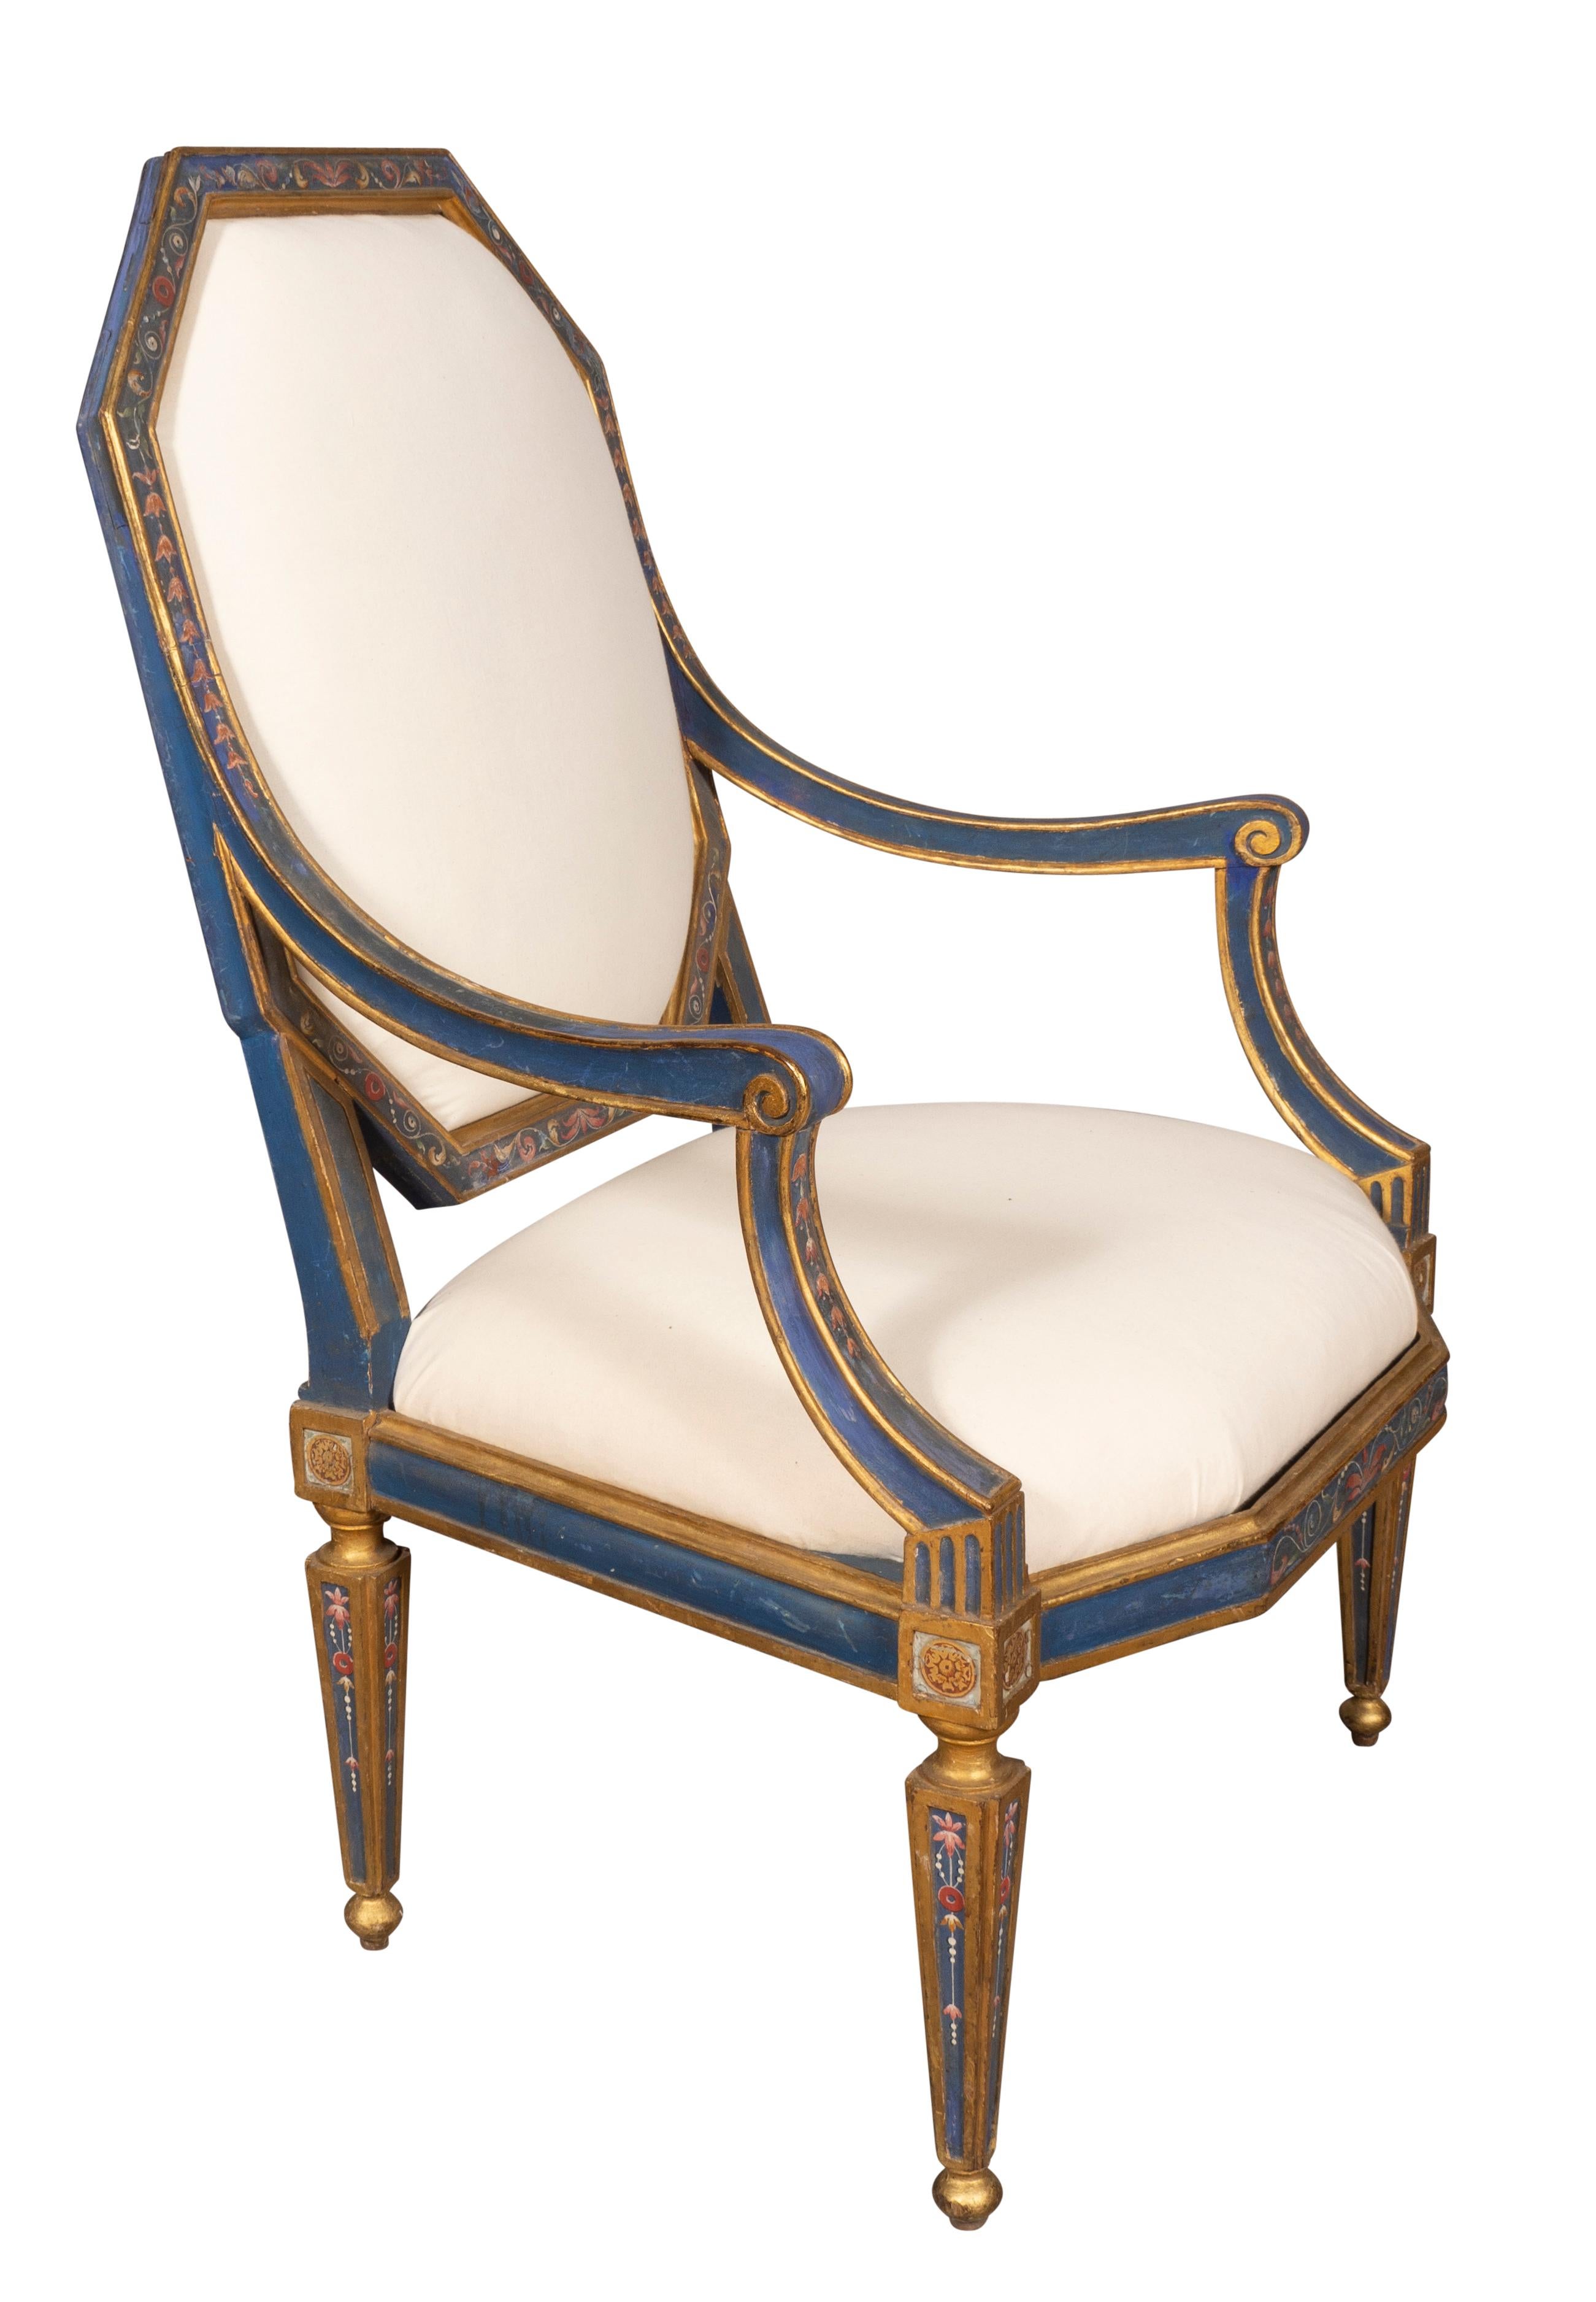 Pair of Italian Neoclassical Painted Armchairs In Good Condition For Sale In Essex, MA